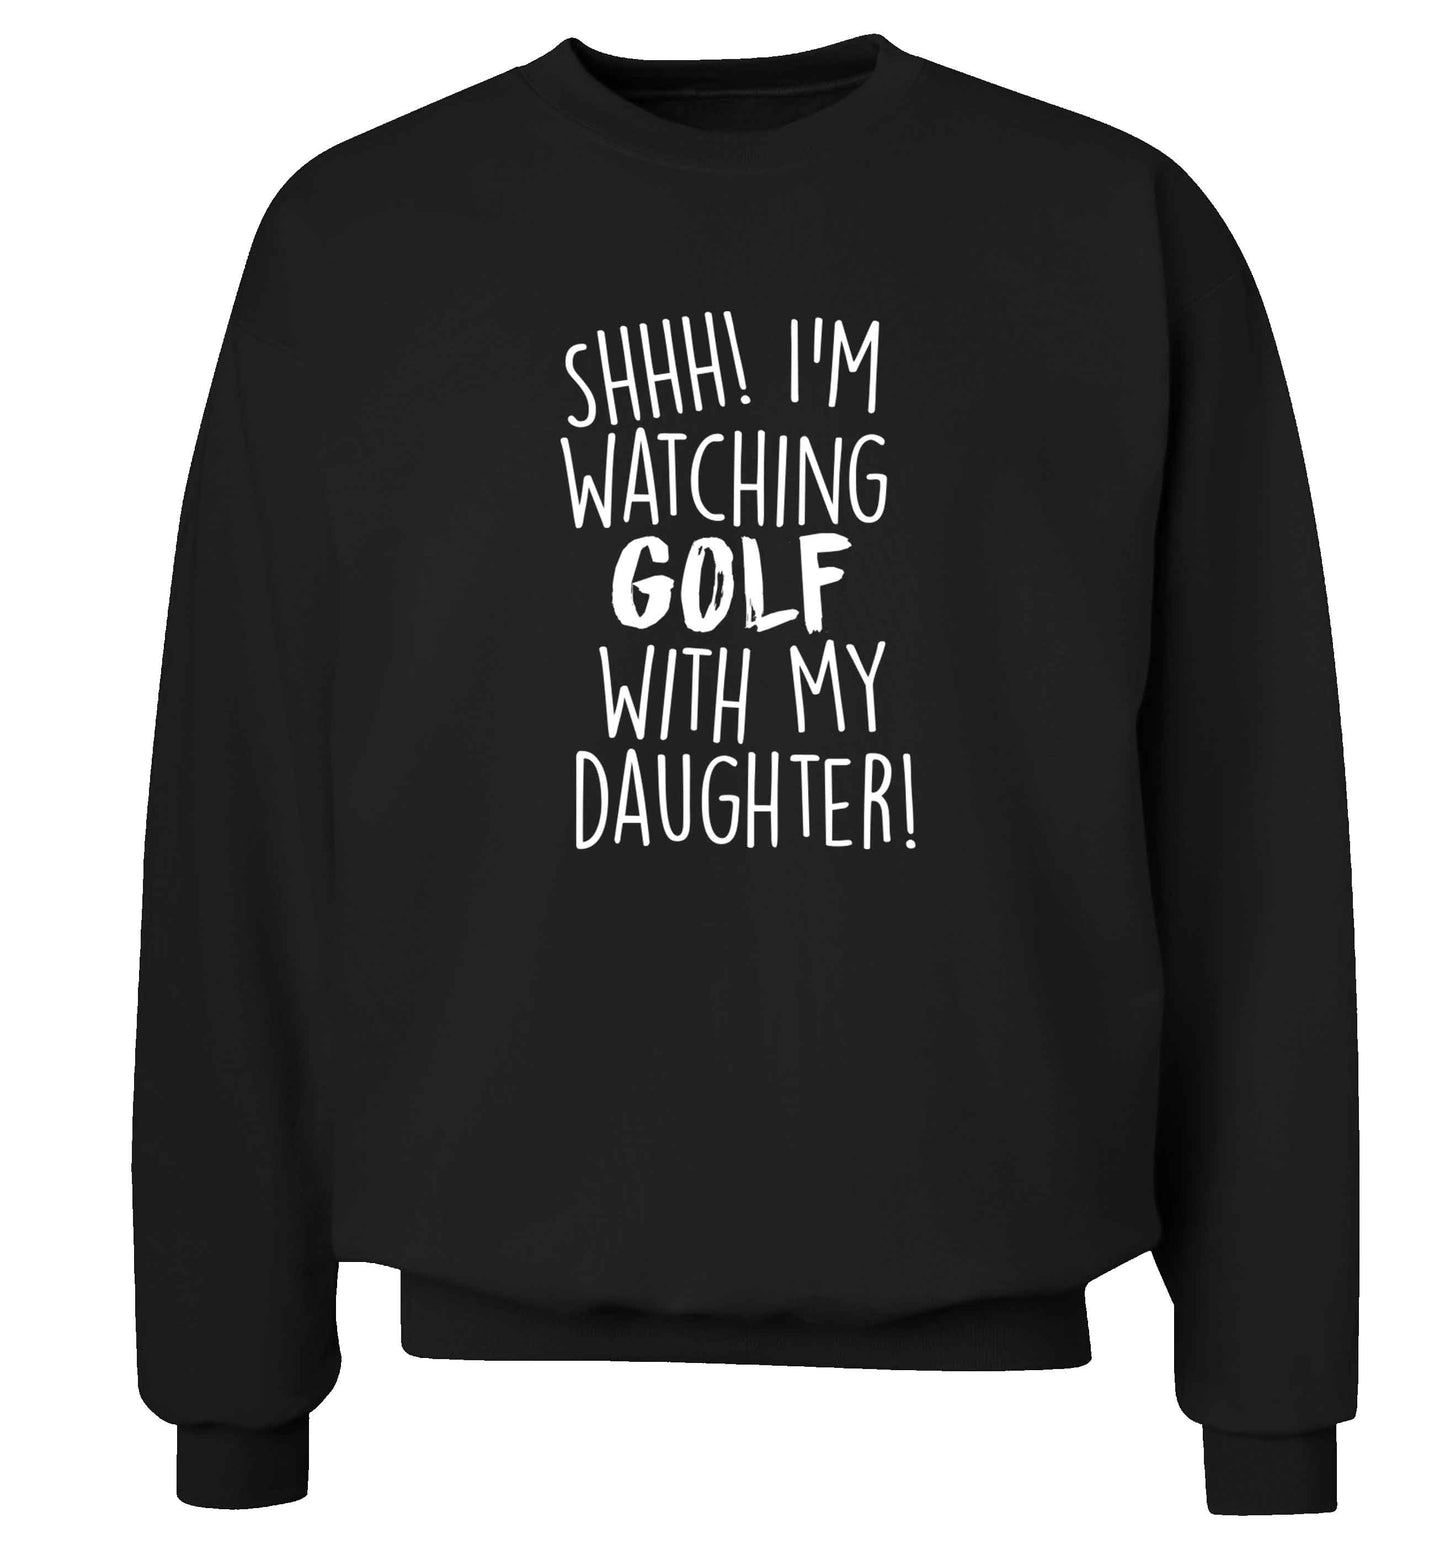 Shh I'm watching golf with my daughter Adult's unisex black Sweater 2XL